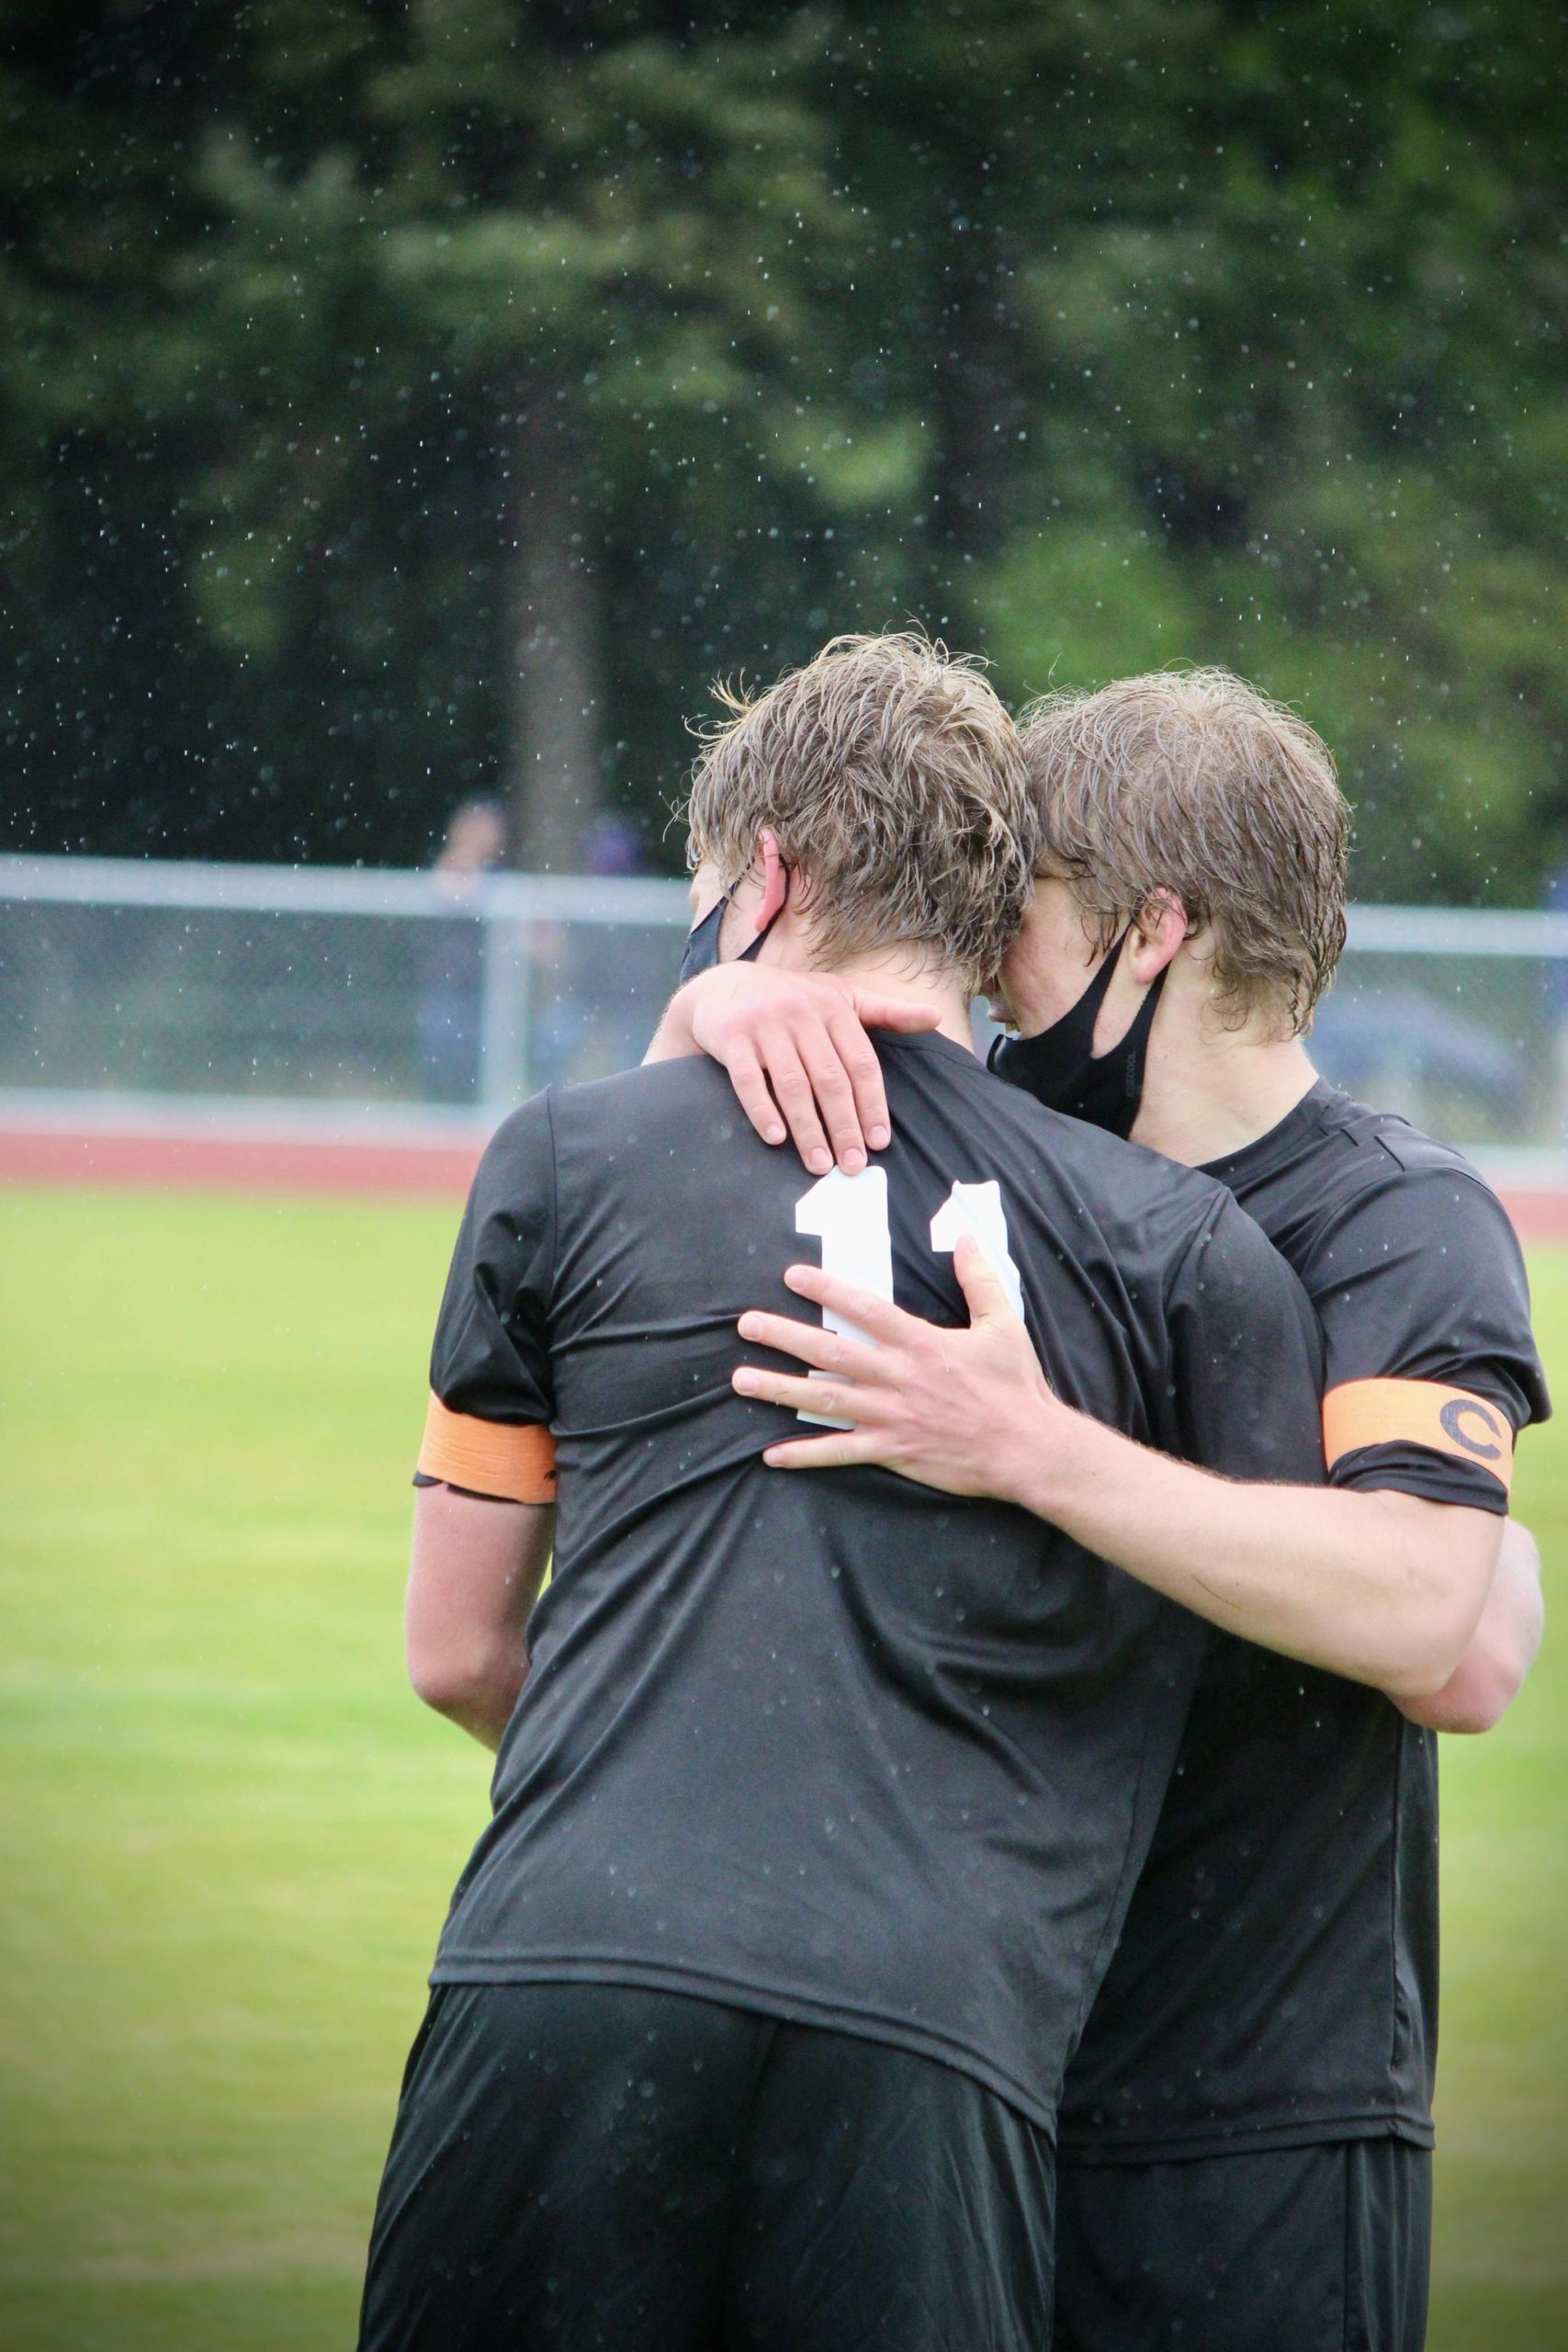 Corey Wiscomb/contributed photo
Senior co-captains August Groeninger & Leonai Van Putten embrace at the dramatic conclusion of the game. Groeninger said to Van Putten, “Since we were kids, it’s been all about this… I love you brother.” Groeninger scored the goal at the end of regulation to send the game into overtime.